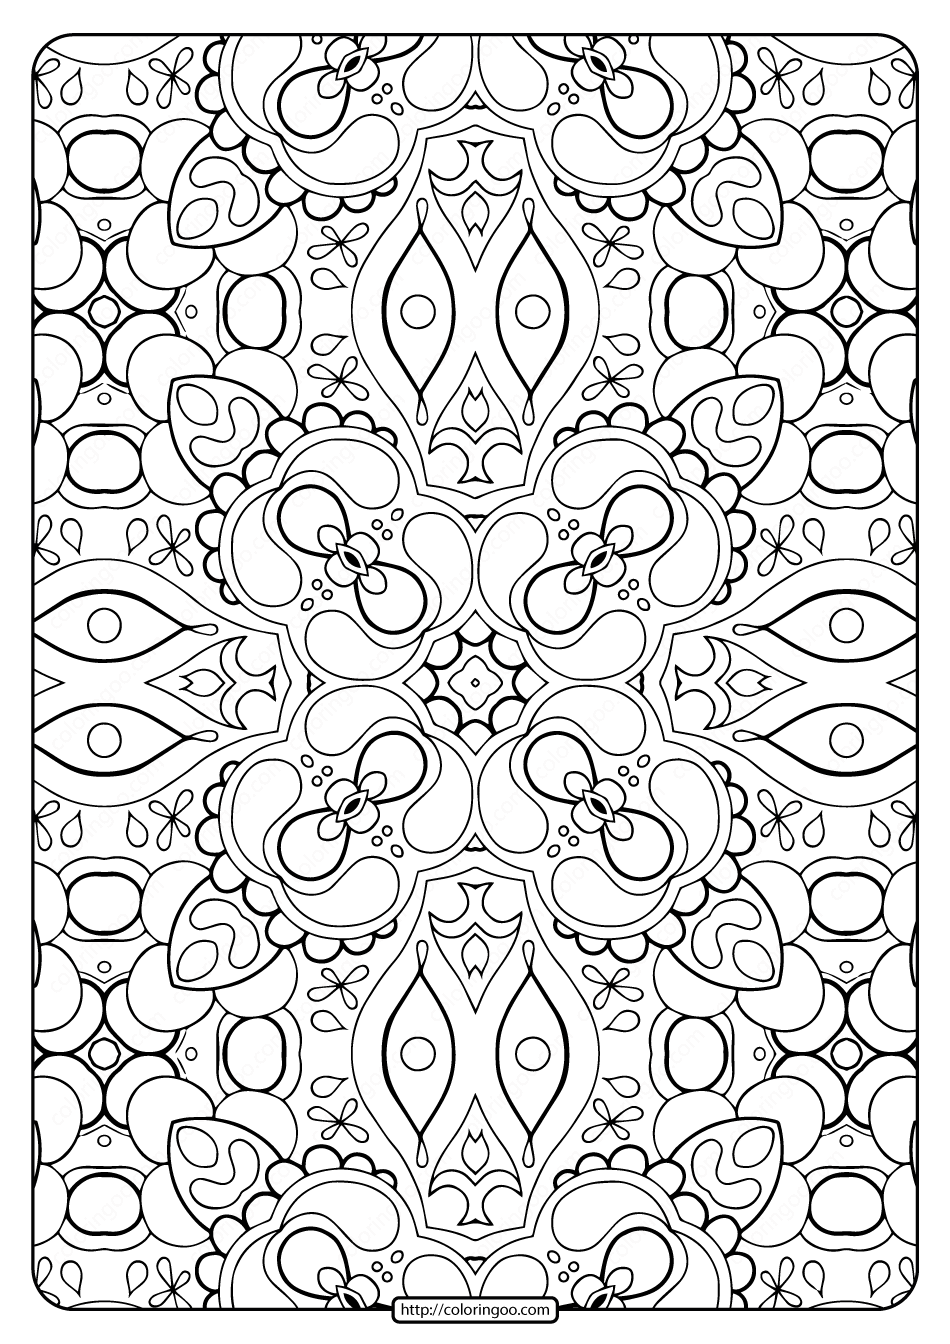 678 Animal Abstract Pattern Coloring Pages for Adult